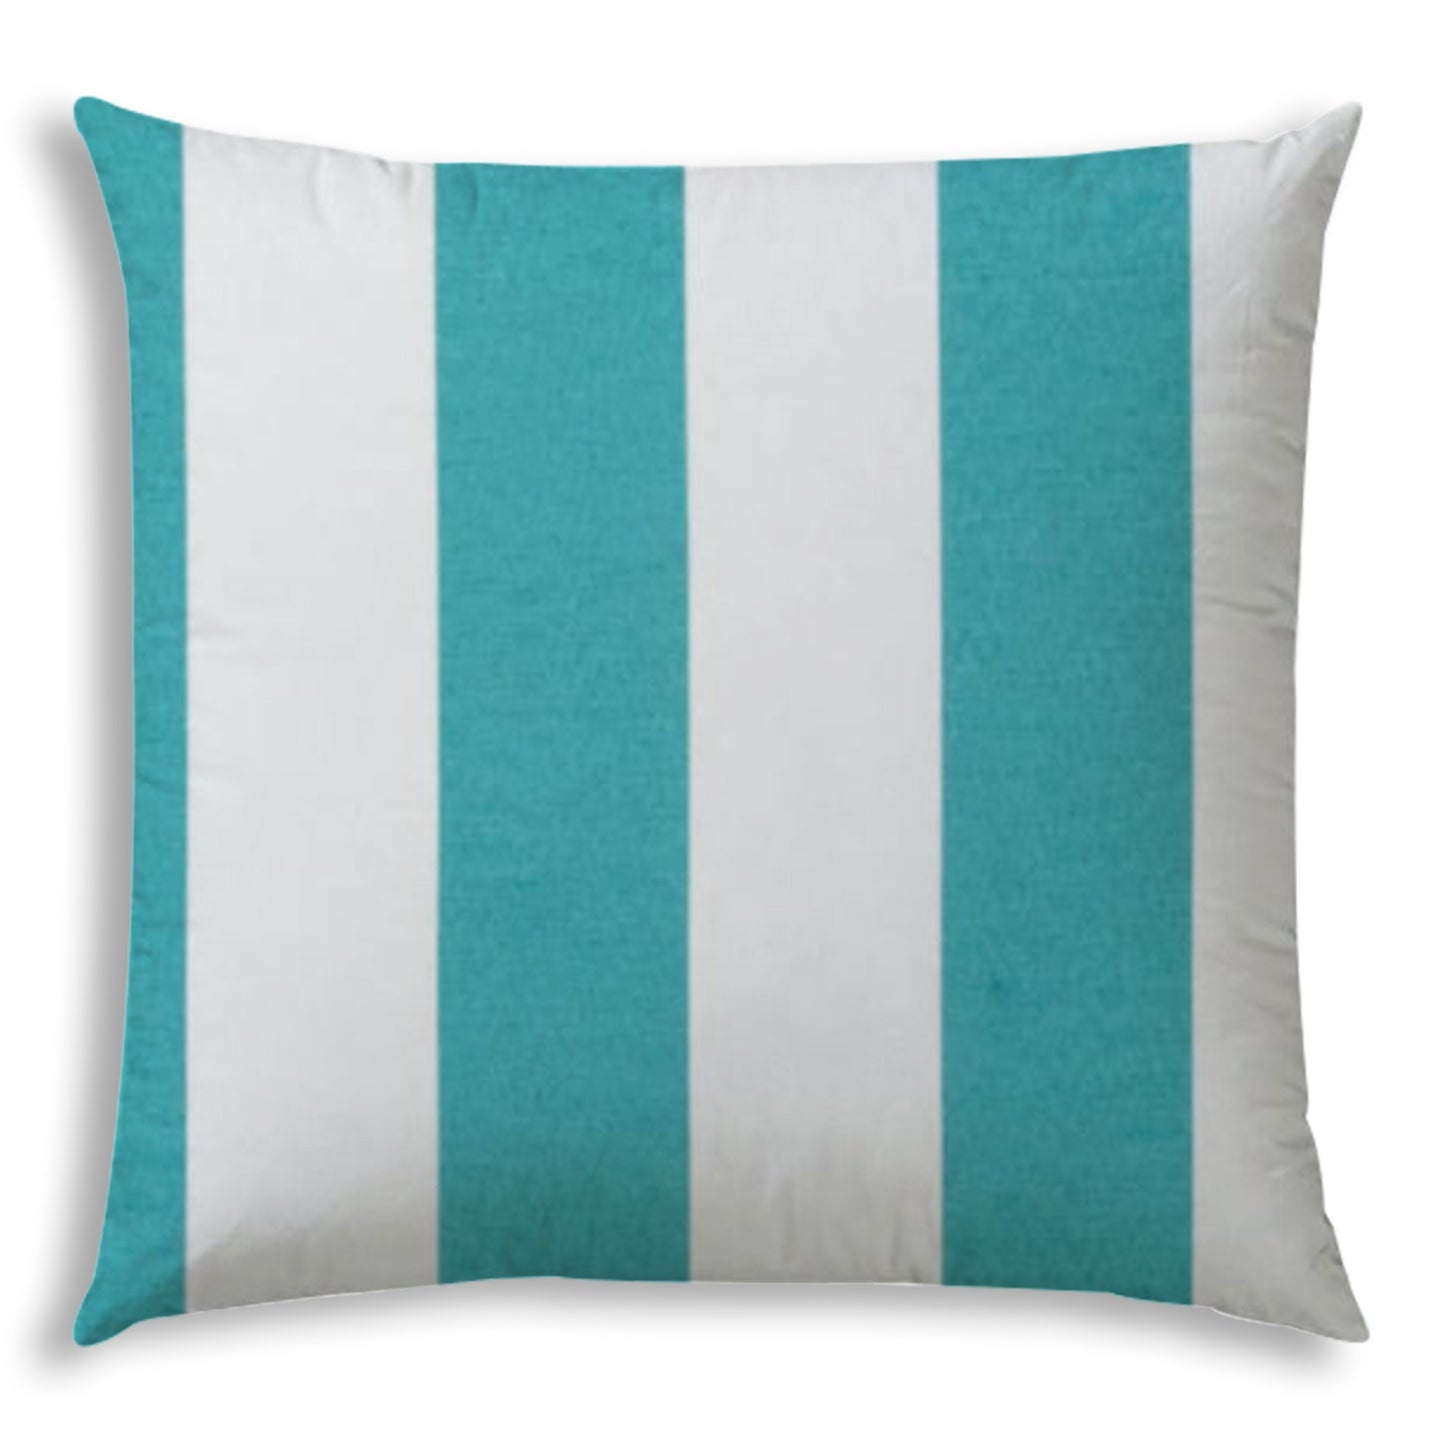 20" X 20" Turquoise And White Blown Seam Striped Throw Indoor Outdoor Pillow